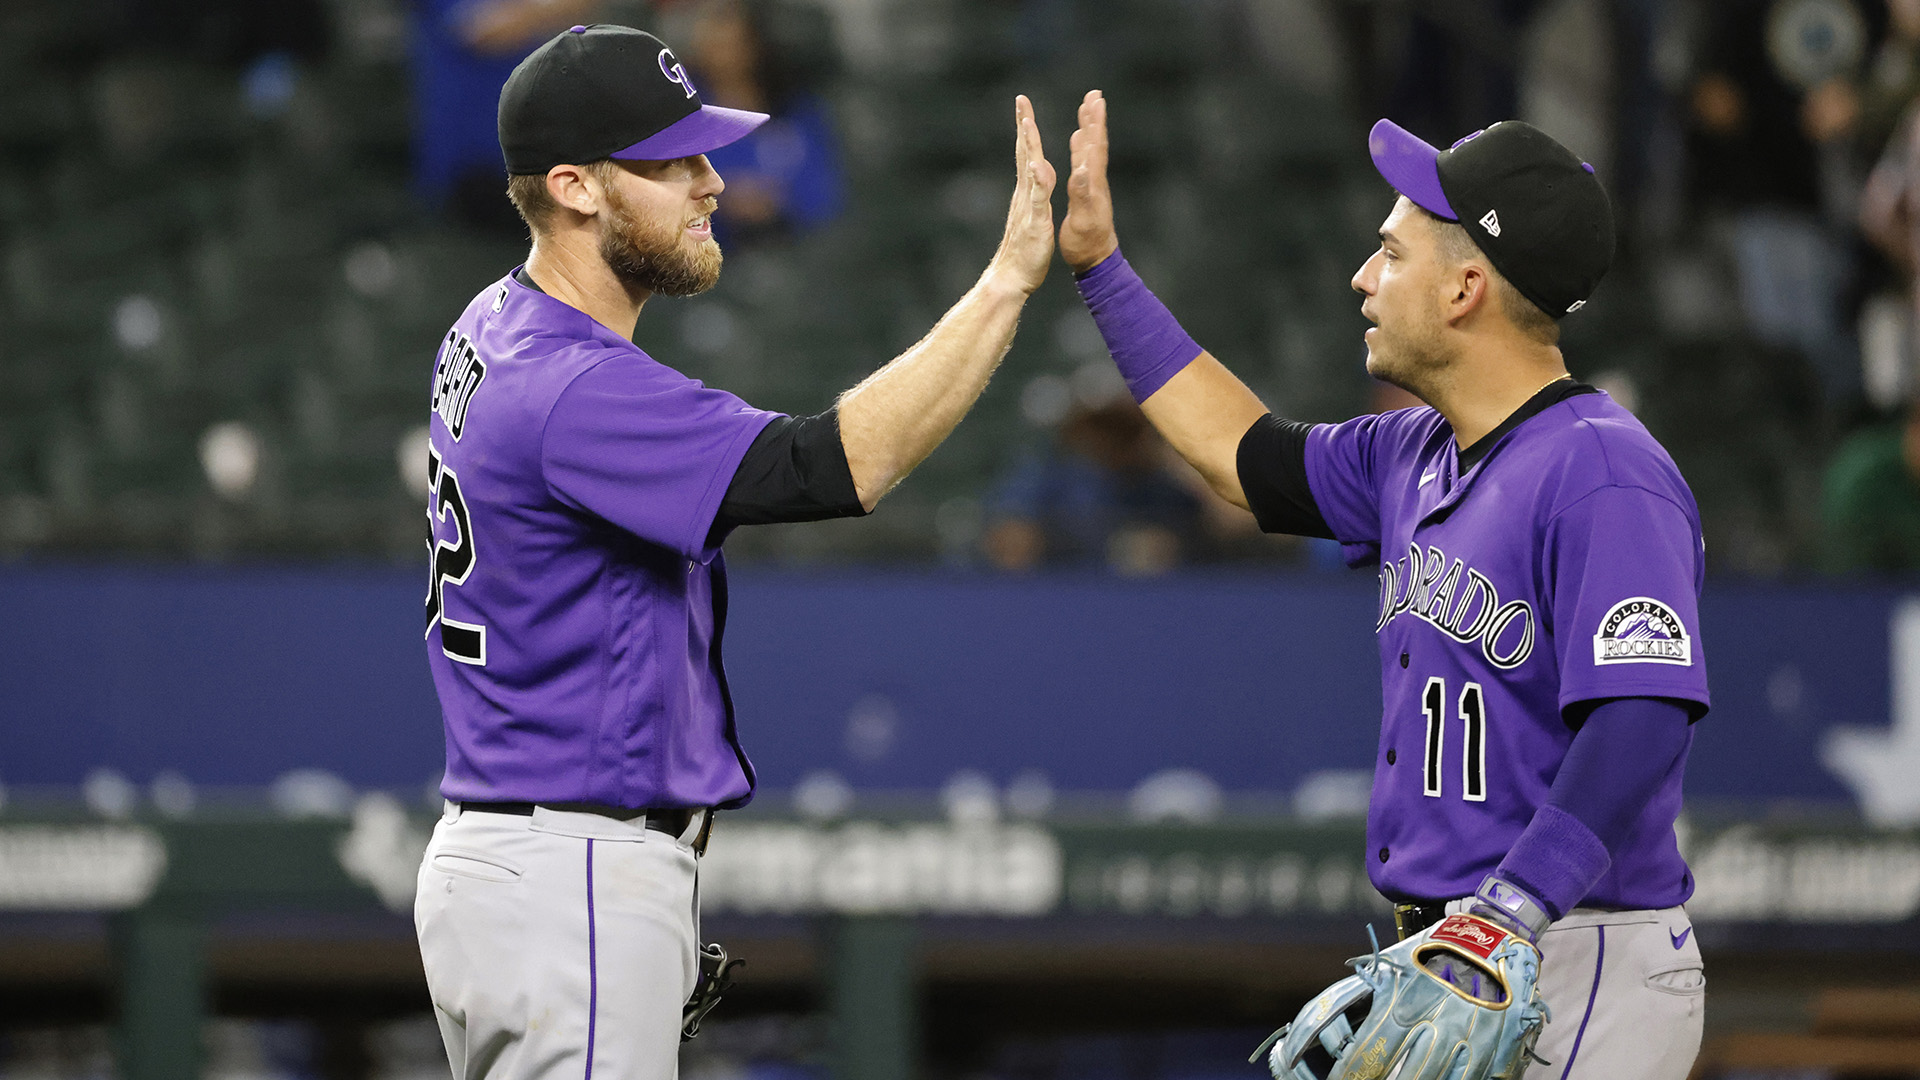 Daniel Bard and Jose Iglesias of the Colorado Rockies celebrate a 4-1 win over the Texas Rangers at Globe Life Field on April 12, 2022 in Arlington, Texas.